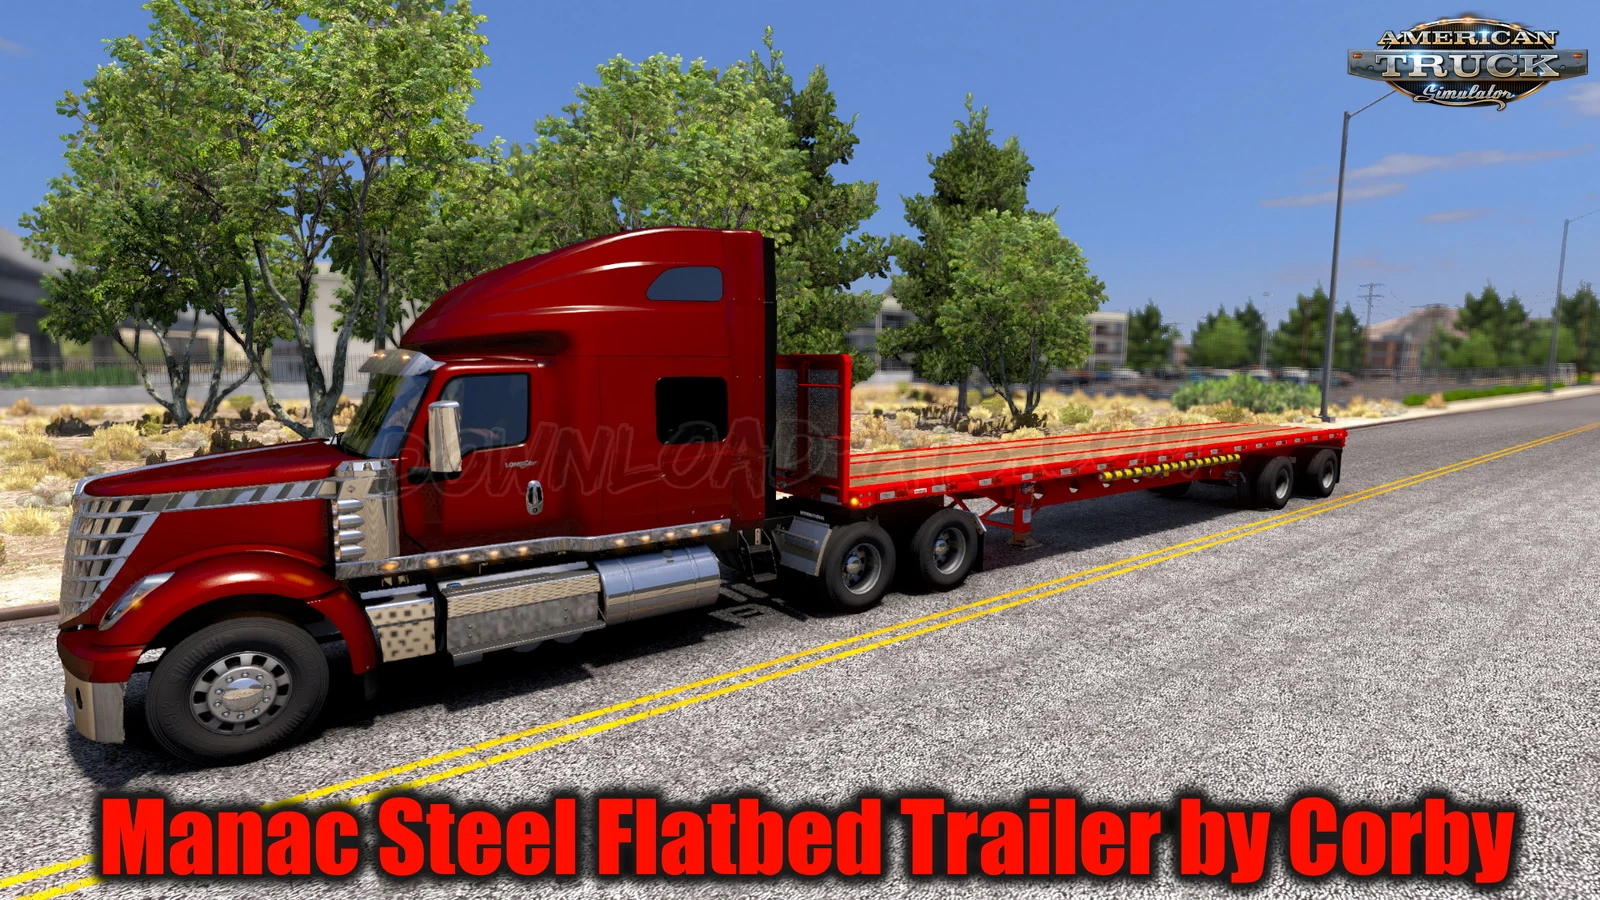 Manac Steel Flatbed Trailer v1.4 by Corby (1.43.x) for ATS